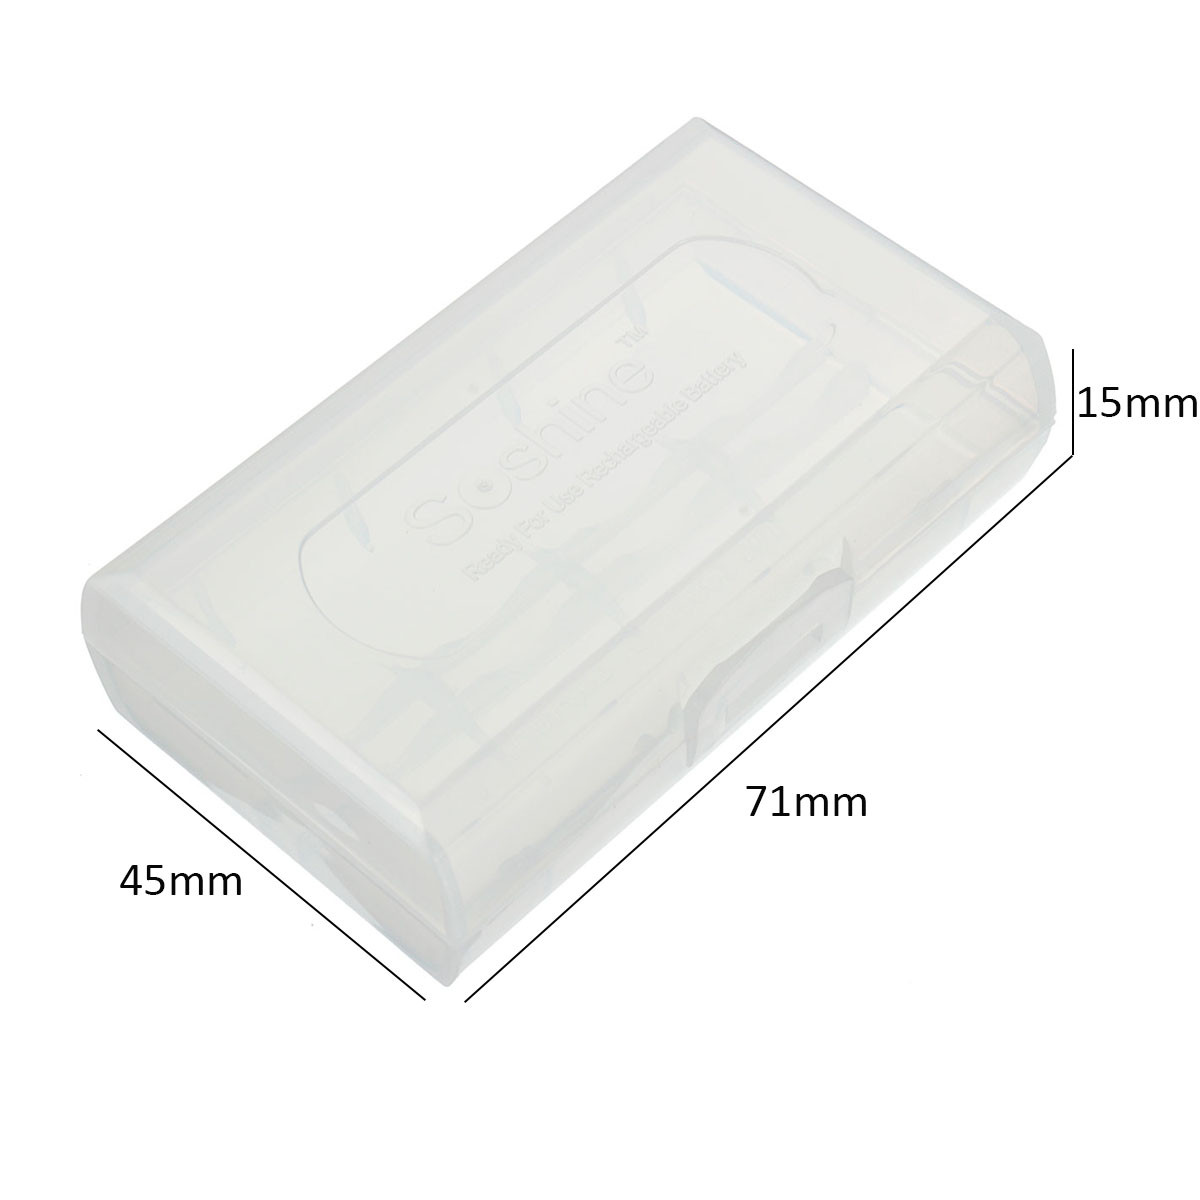 12X-Plastic-Dual-Sleeve-Cover-Case-Storage-Box-for-18650-16340CR123A-Battery-1963674-1